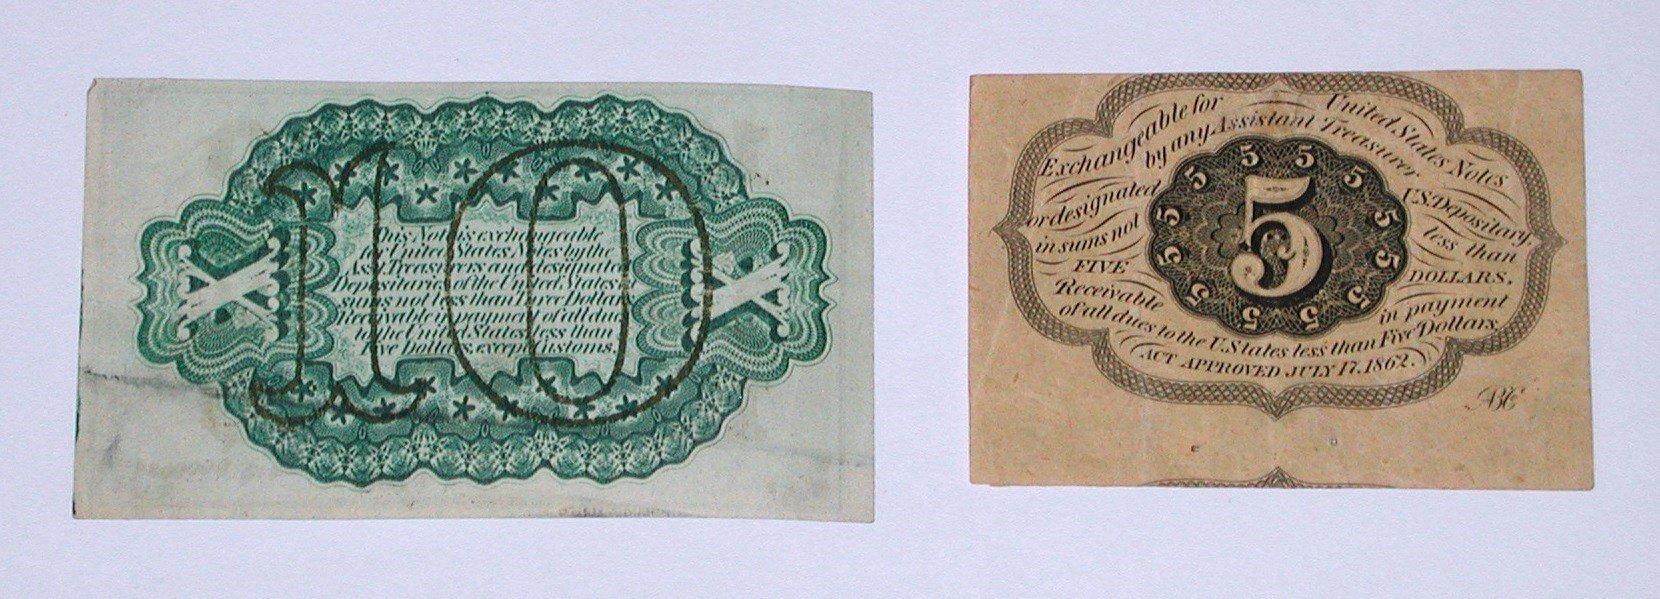 TWO (2) FRACTIONAL POSTAGE CURRENCY NOTES